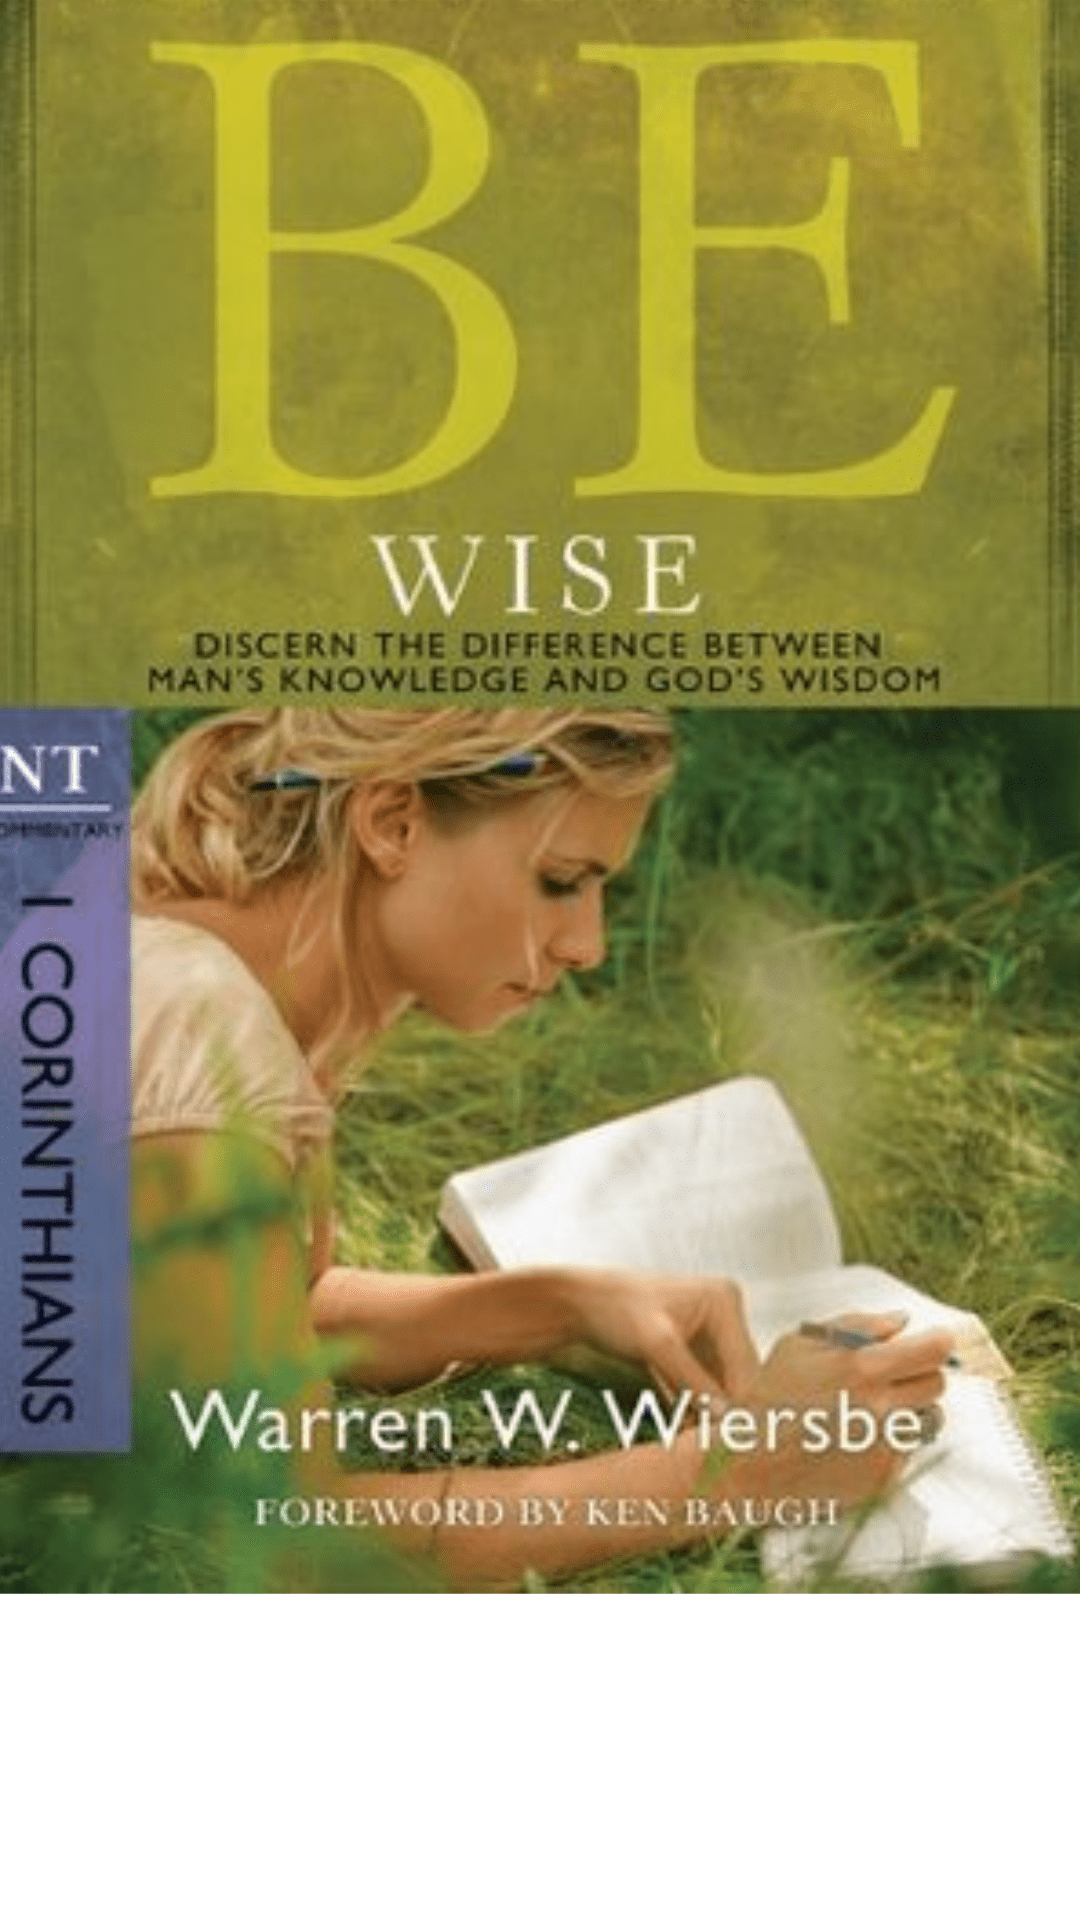 Be Wise: 1 Corinthians: Discern the Difference Between Man's Knowledge and God's Wisdom